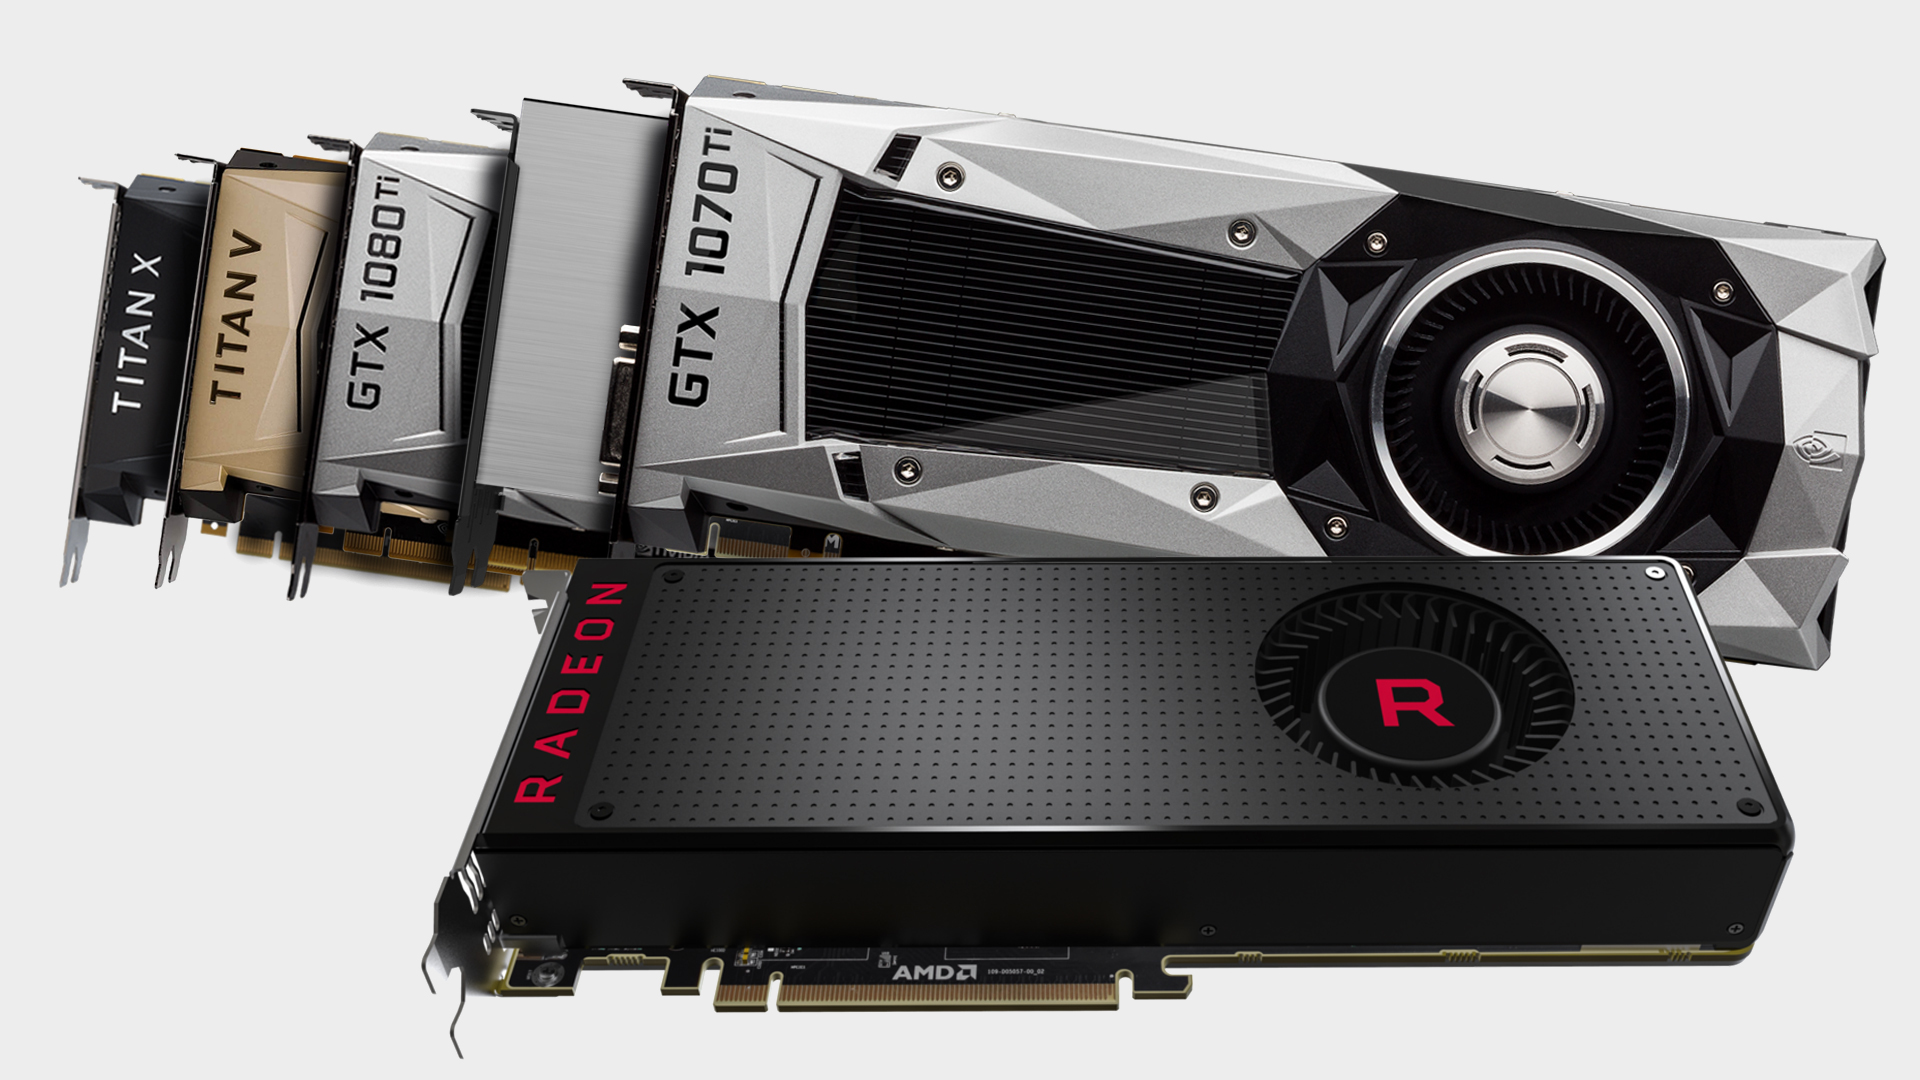 AMD Radeon RX 5600 XT ‘Ultimate 1080p Gaming’ GPU Launched: Prices,...